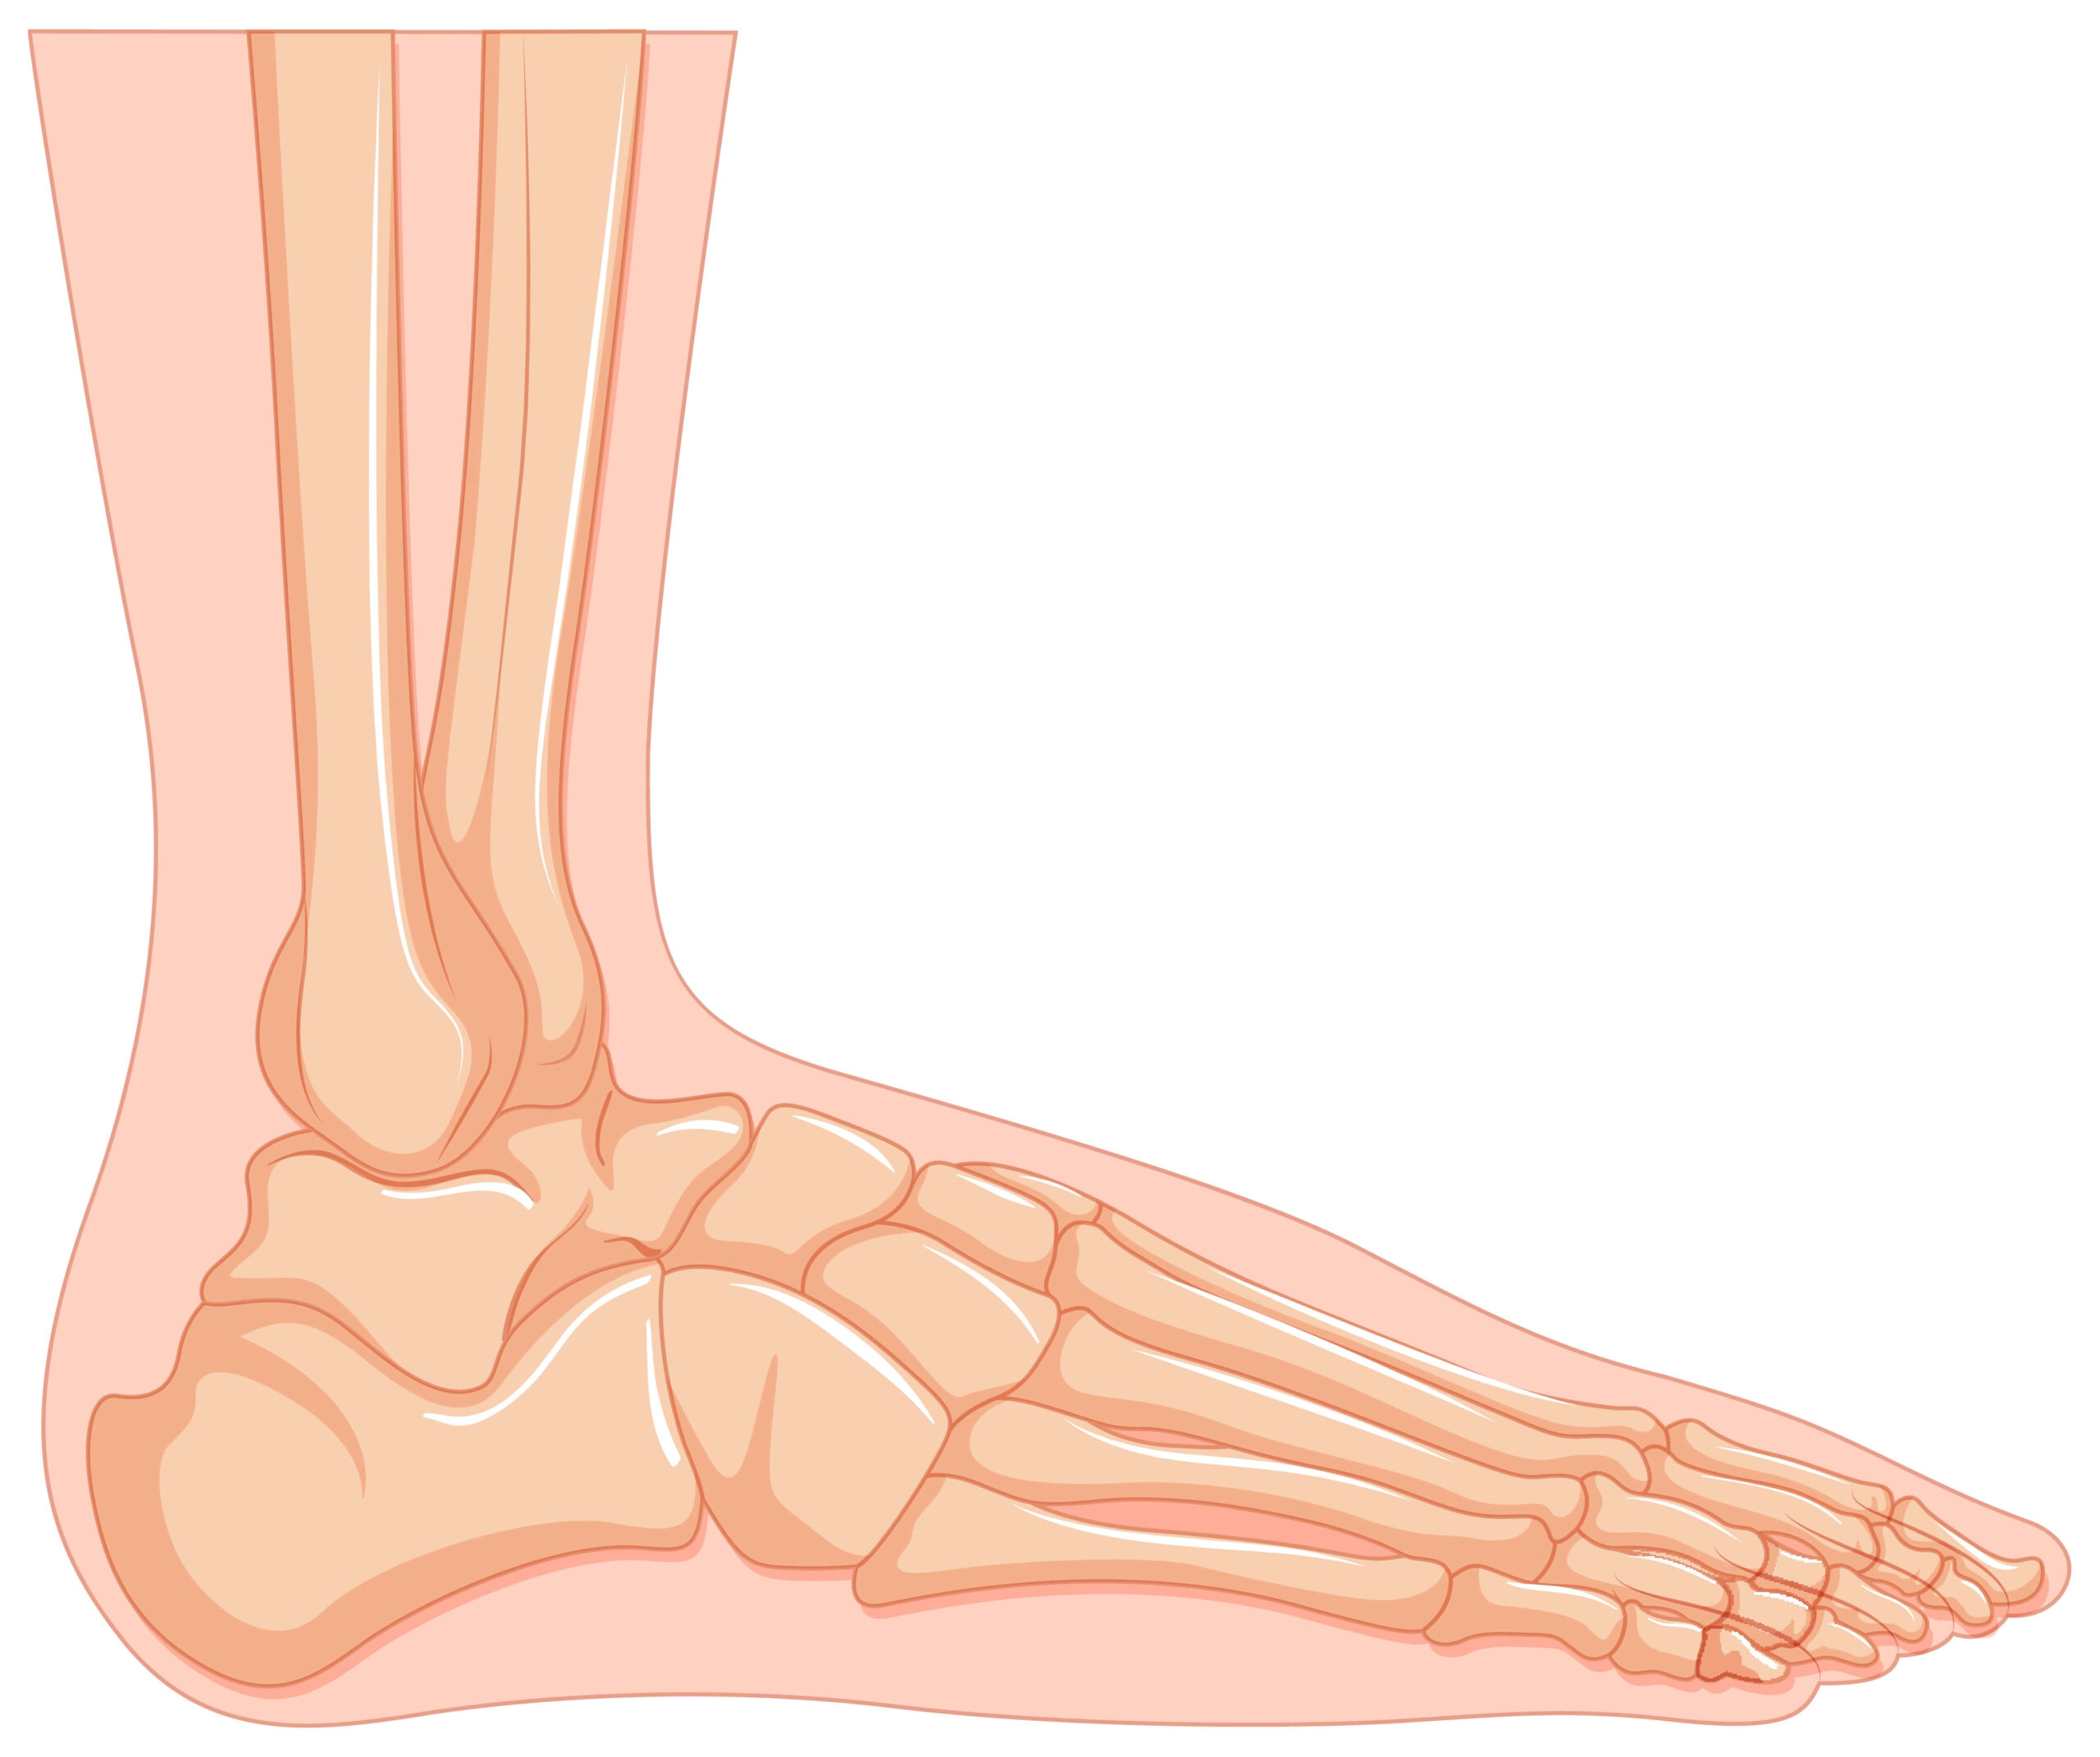 Foot and Ankle Pain Should not be Ignored